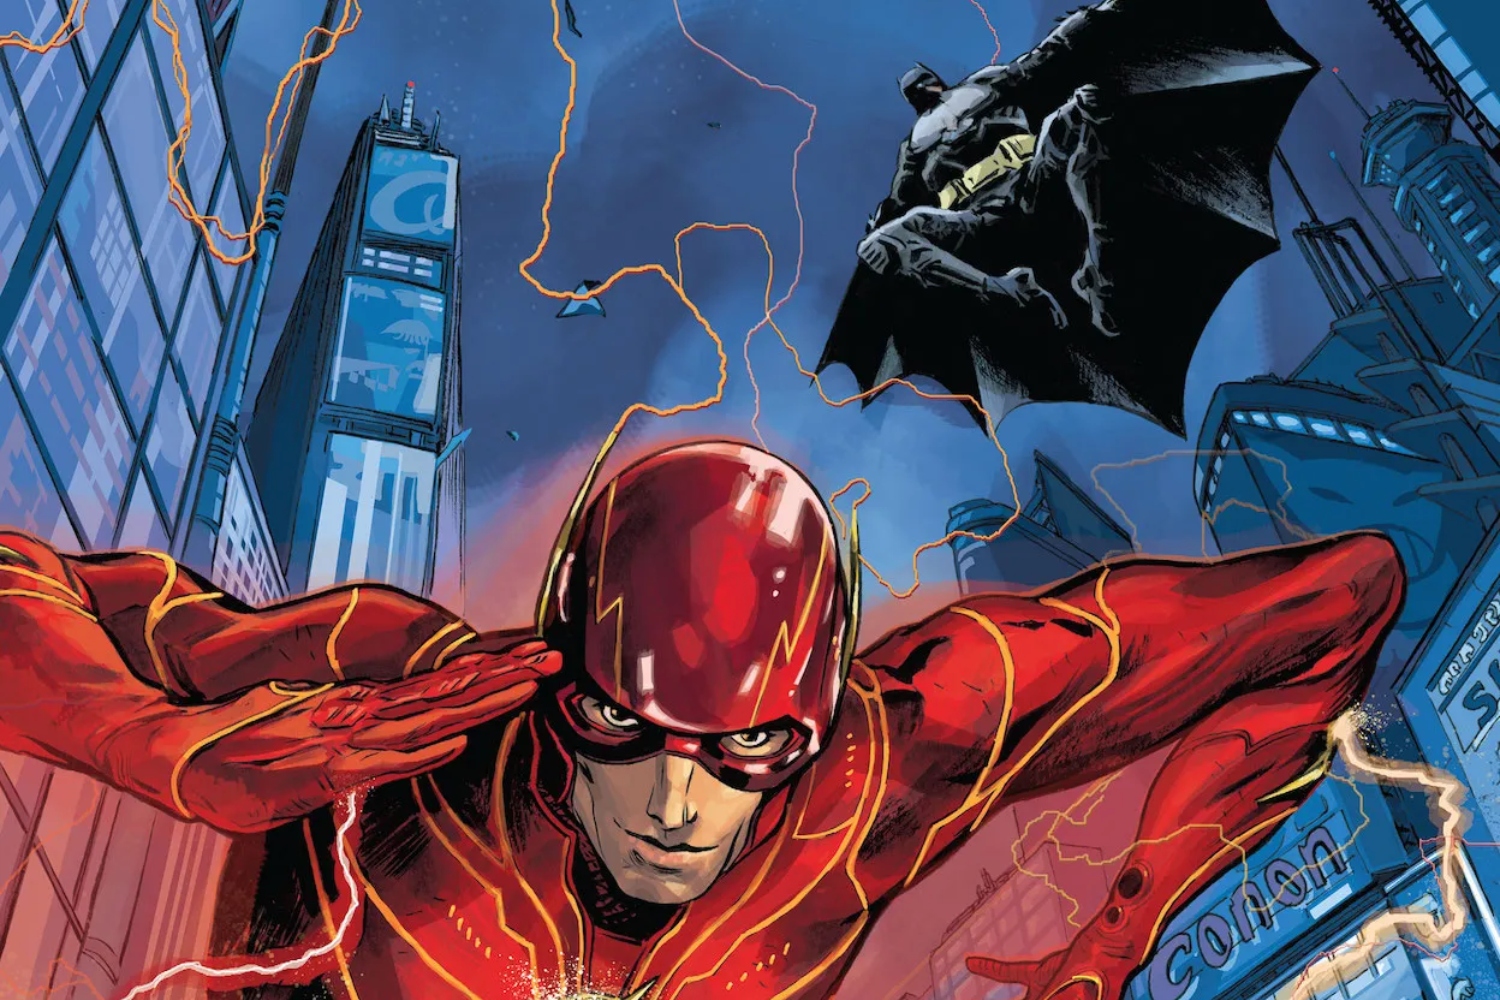 ‘The Flash: The Fastest Man Alive’ #1 sets the pace for a solid pre-movie story